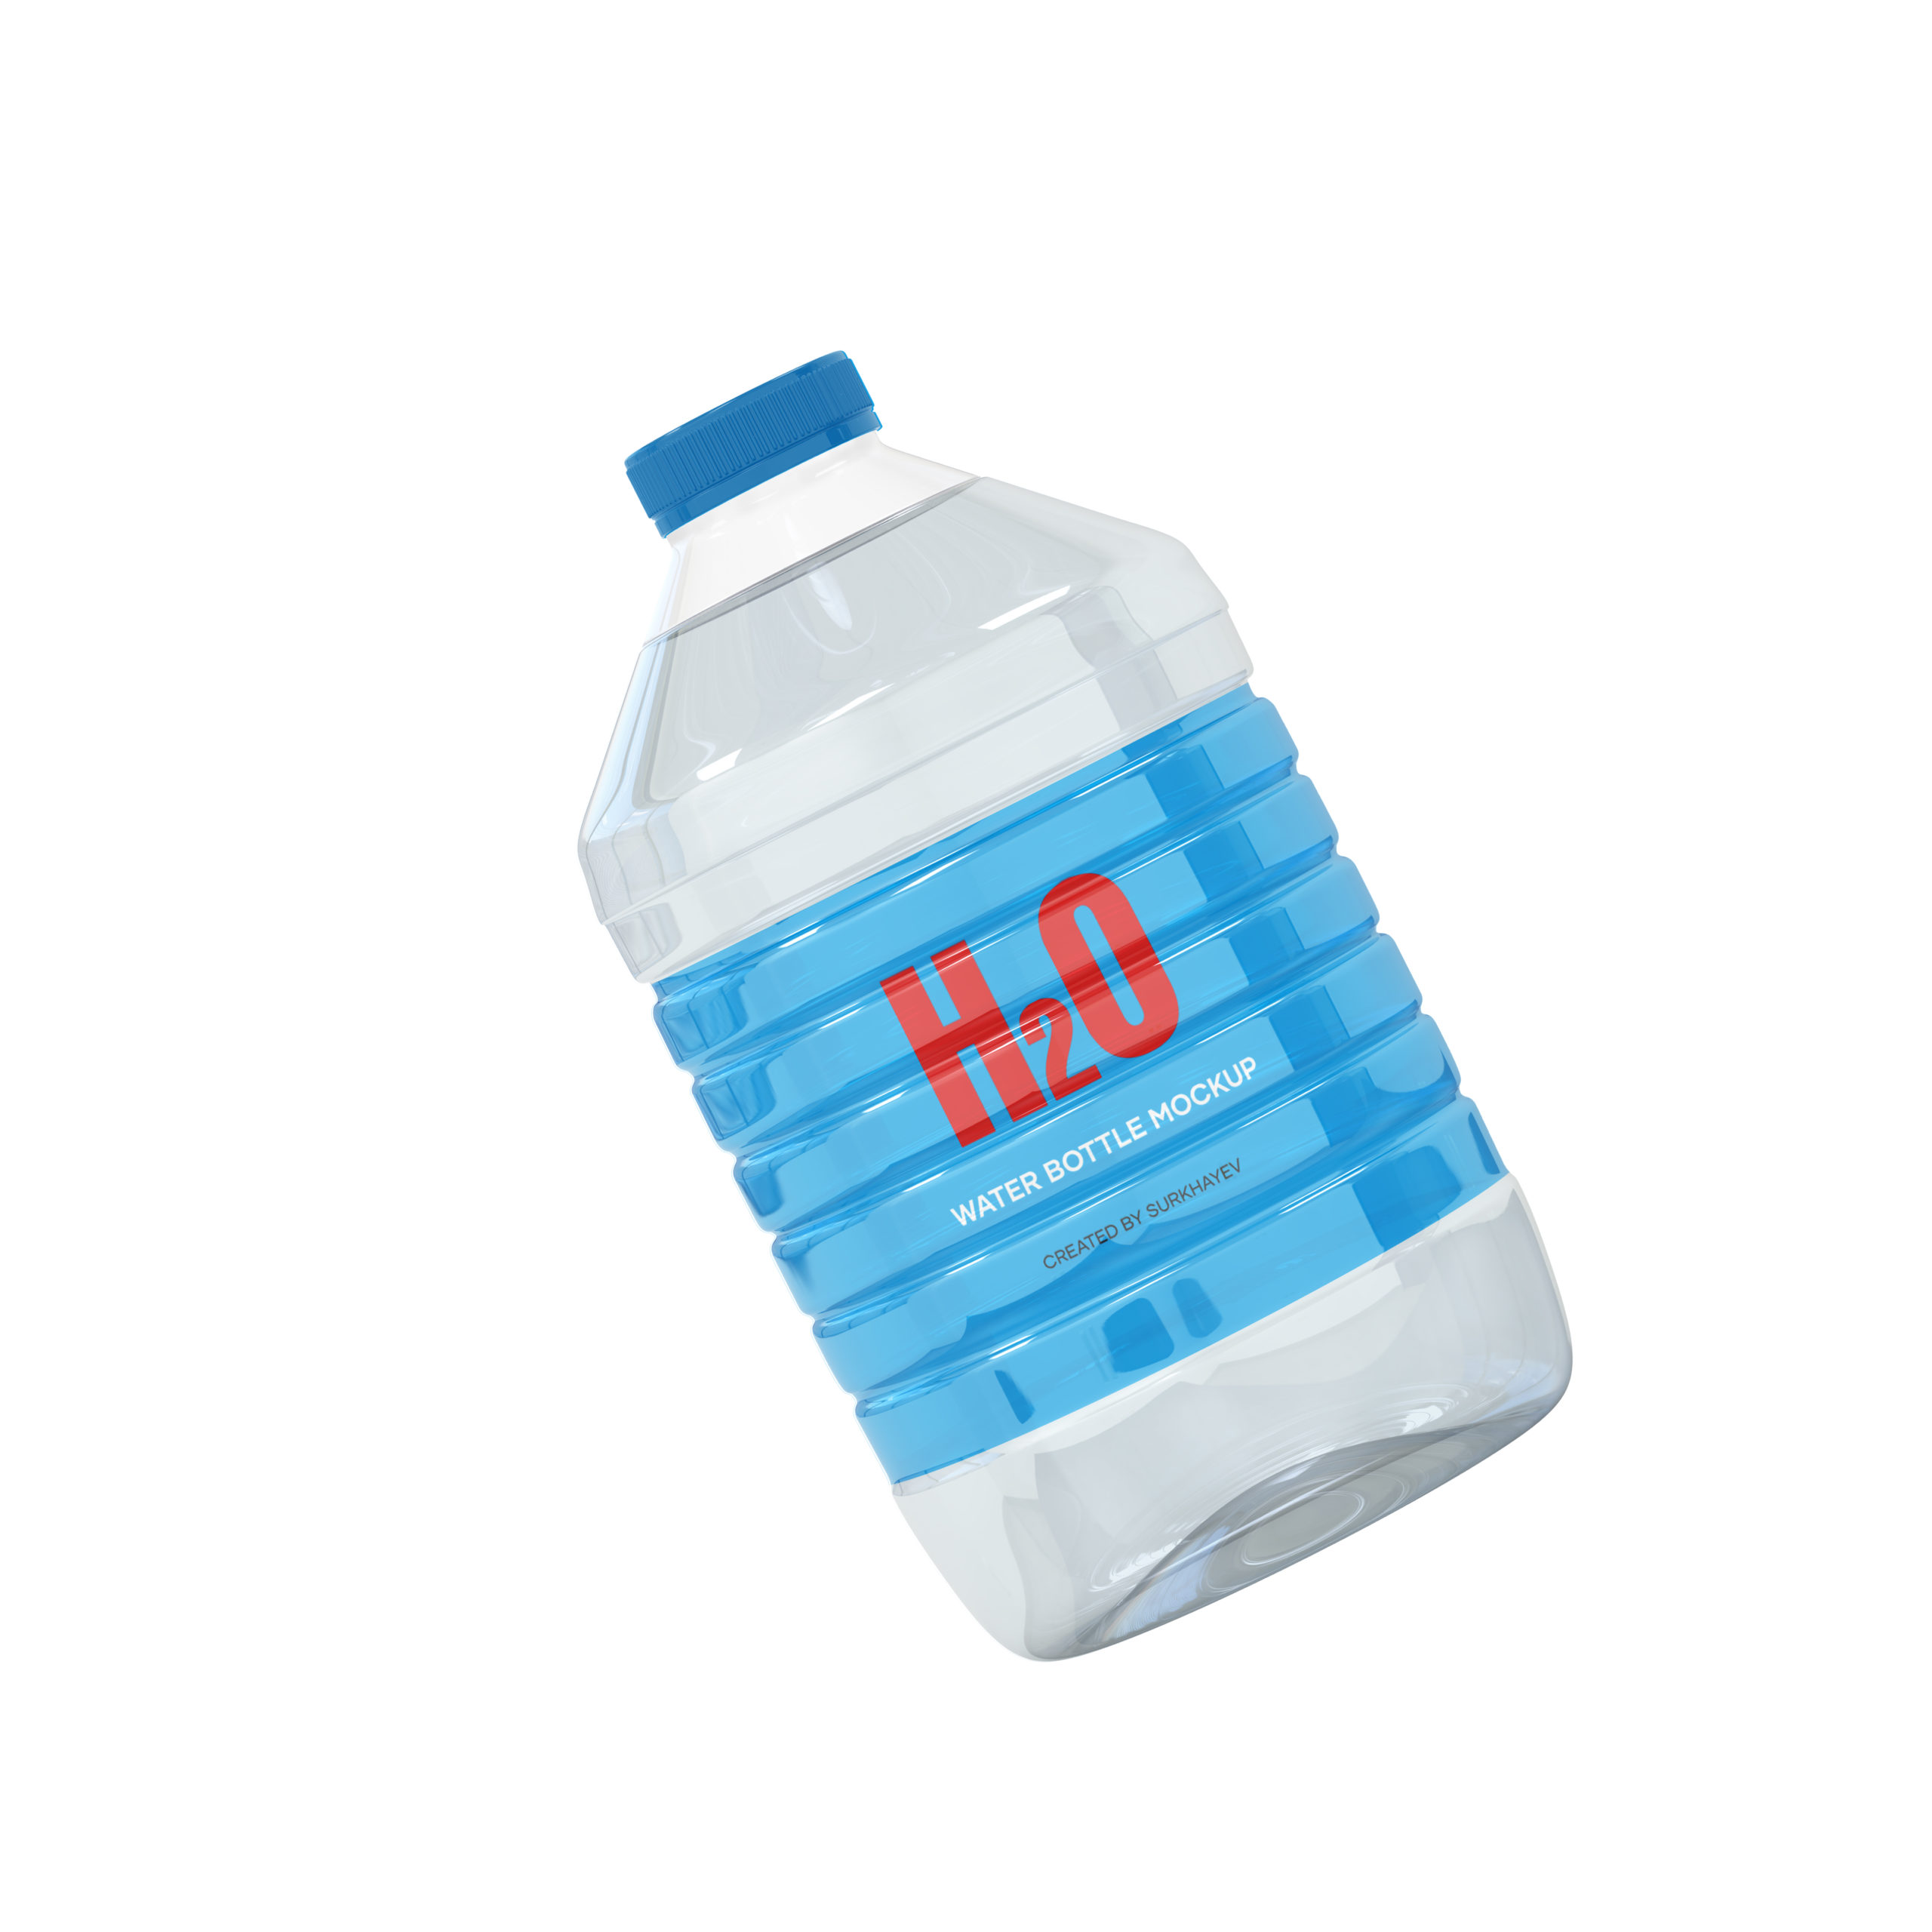 5liter bottle water scaled